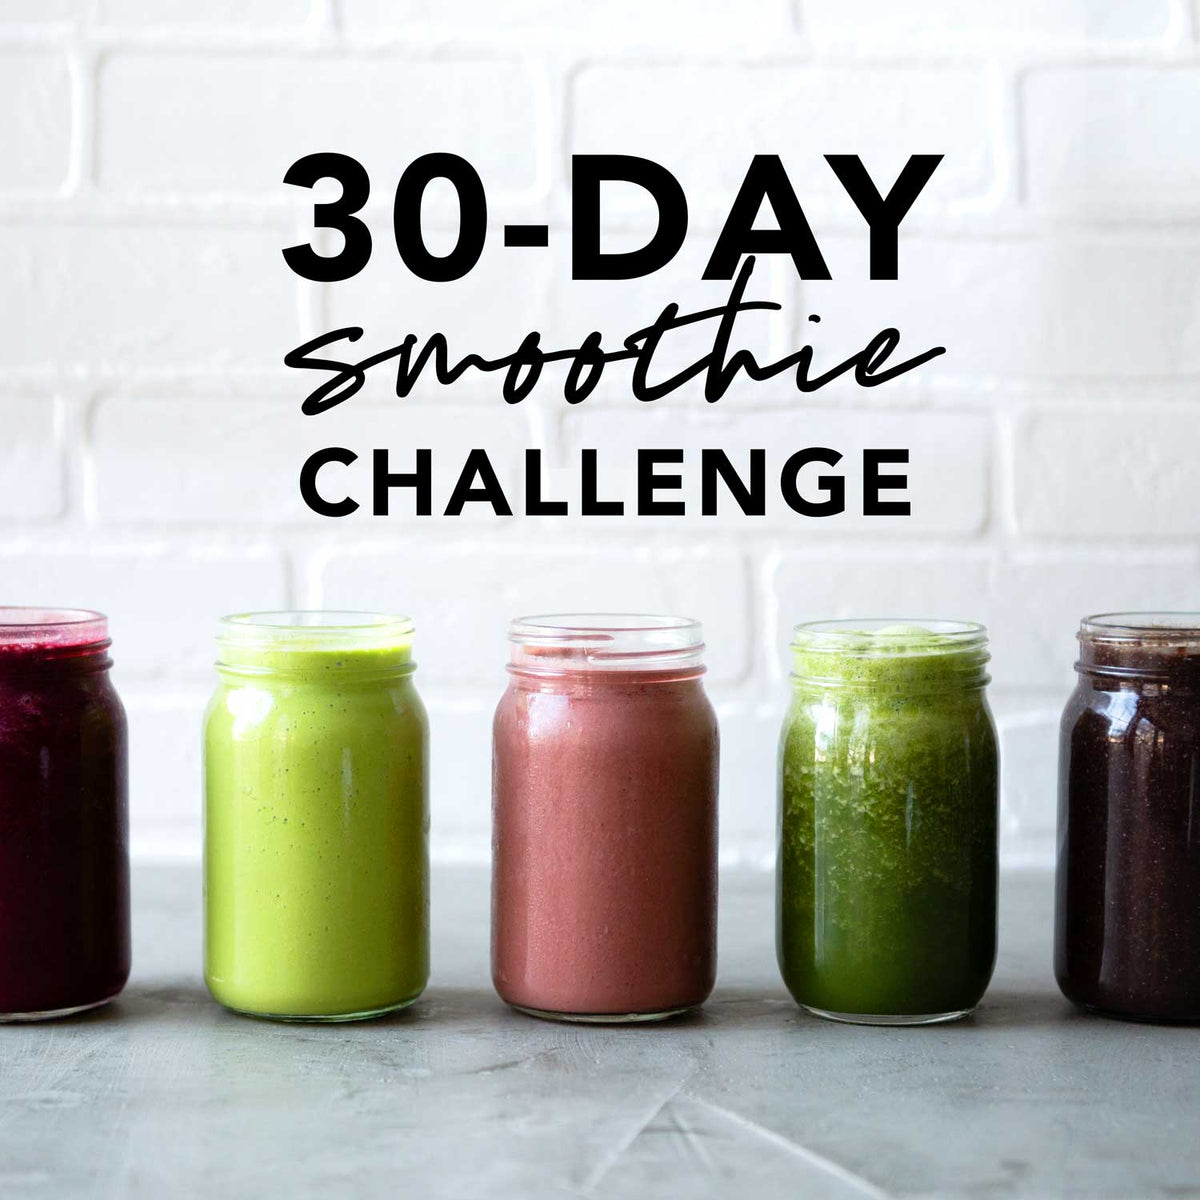 30-Day Smoothie Challenge - Simple Green Smoothies